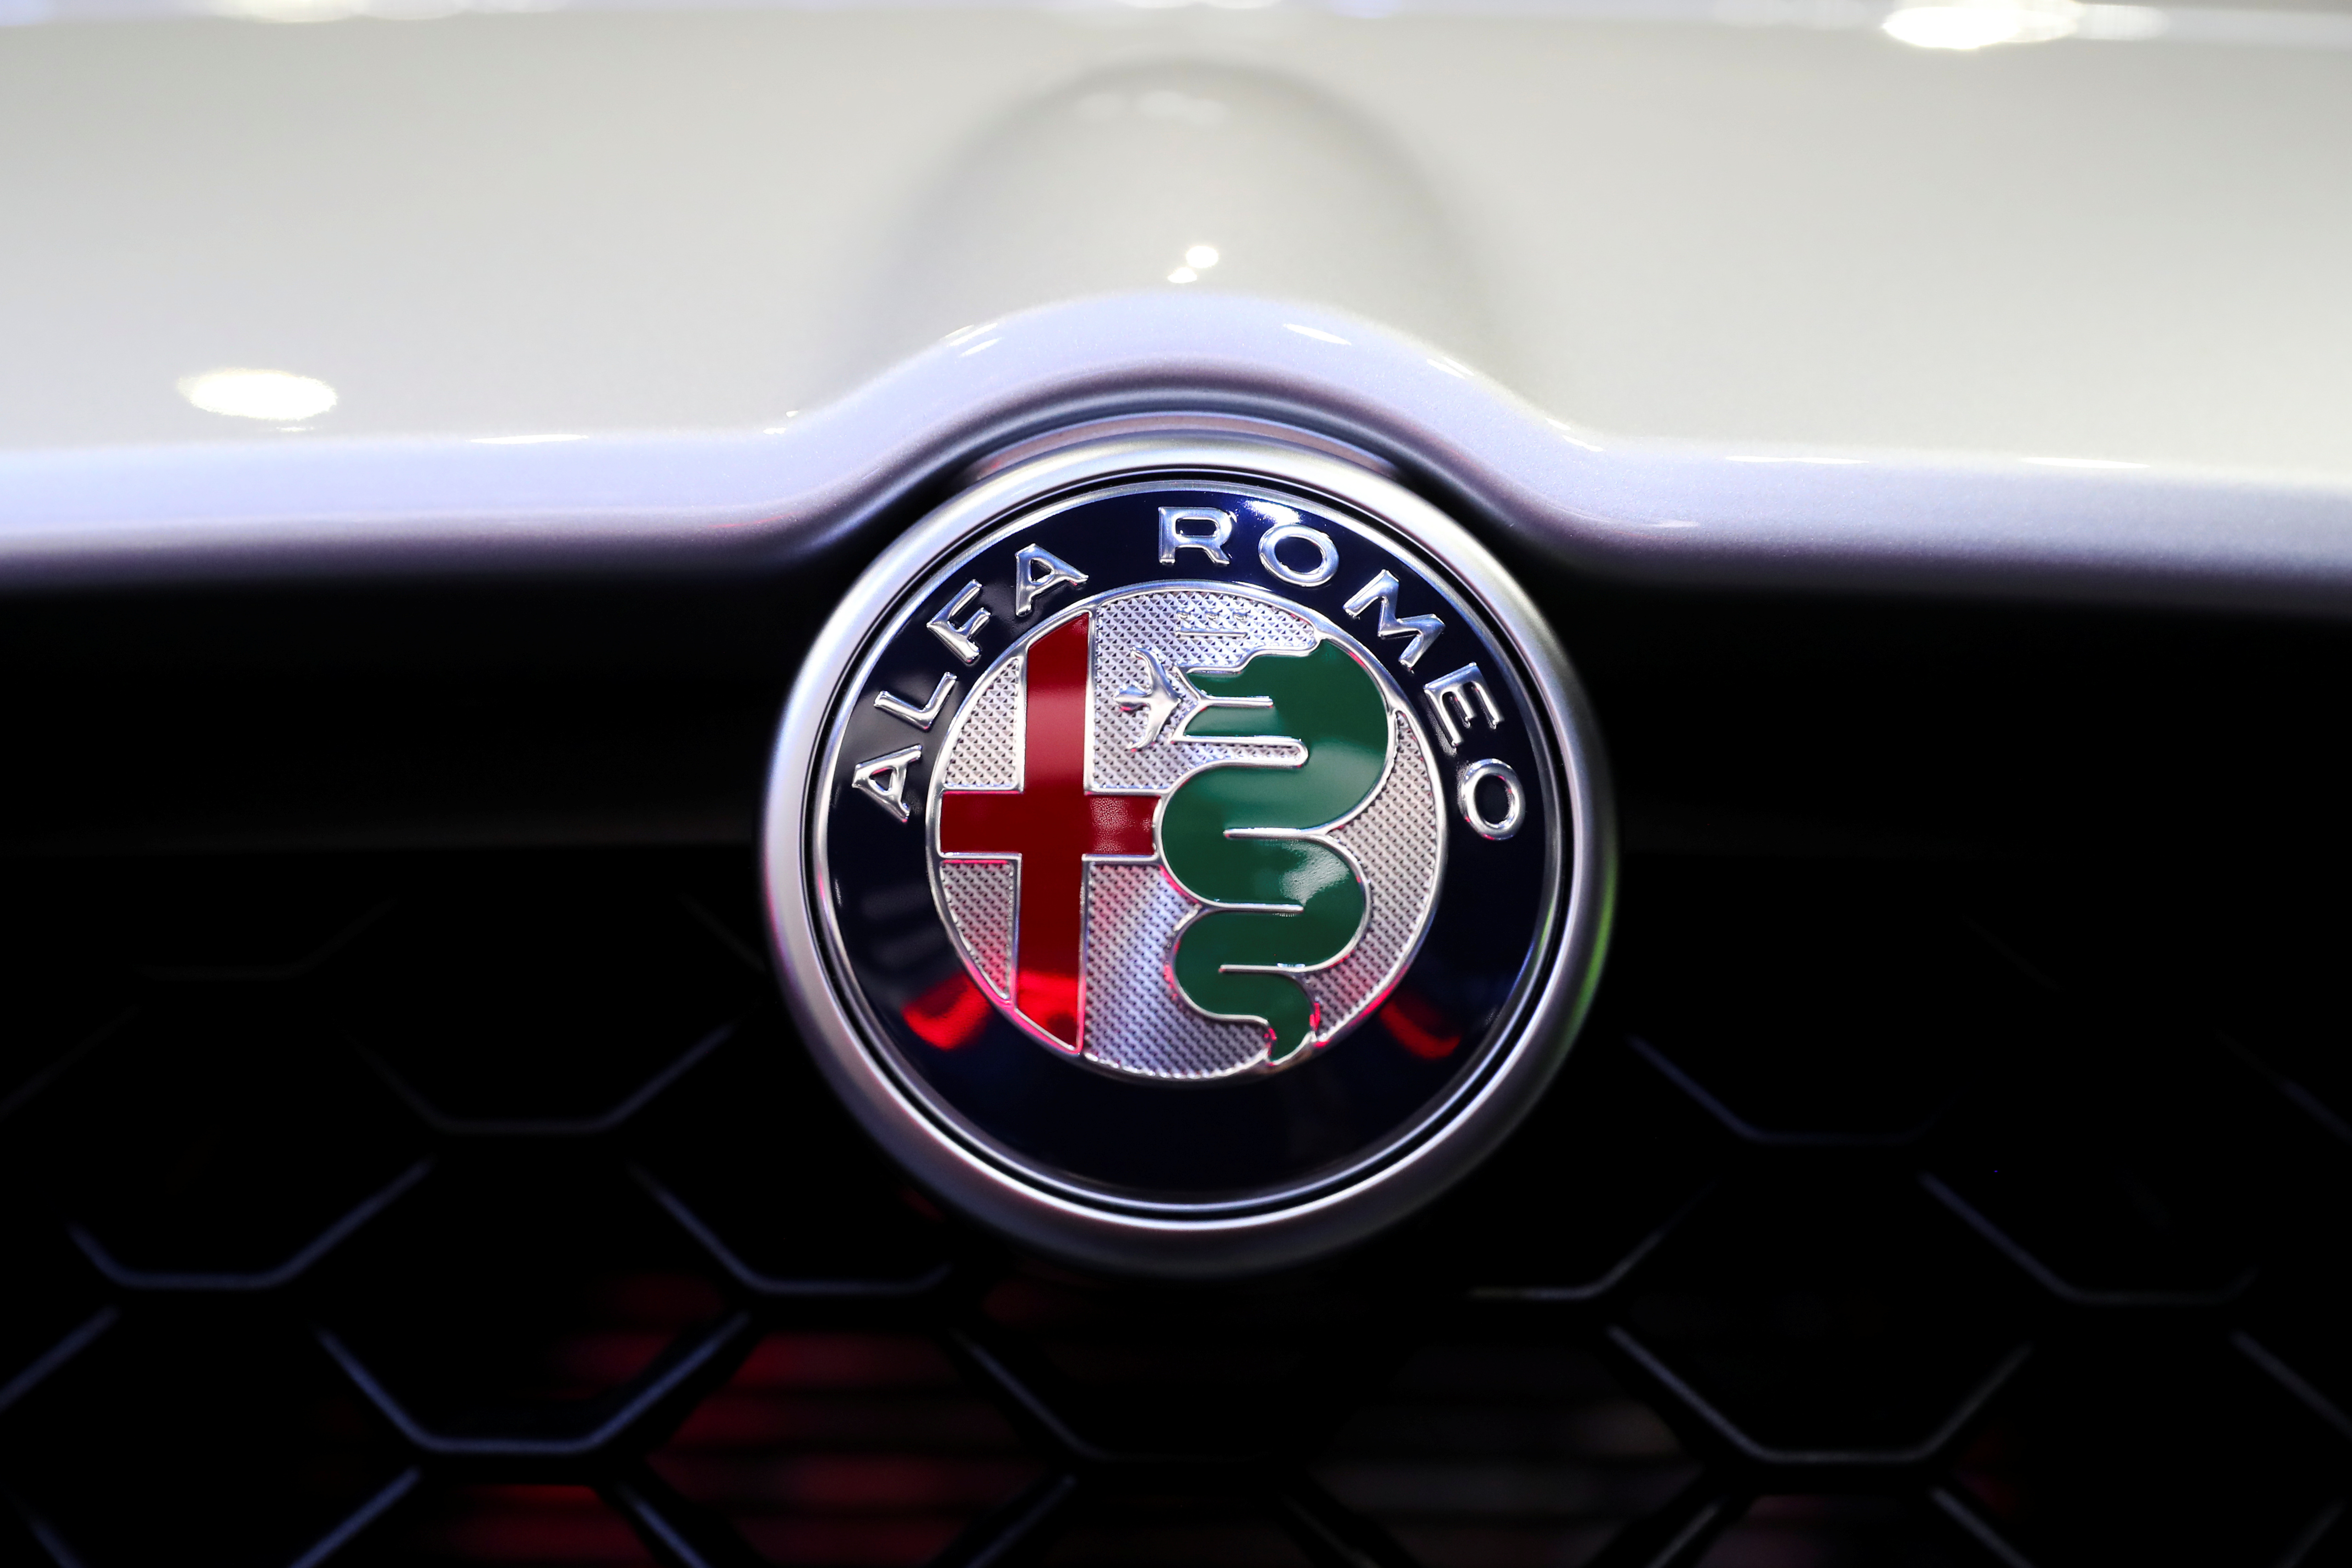 Alfa Romeo to develop large car in the United States, Auto News, ET Auto